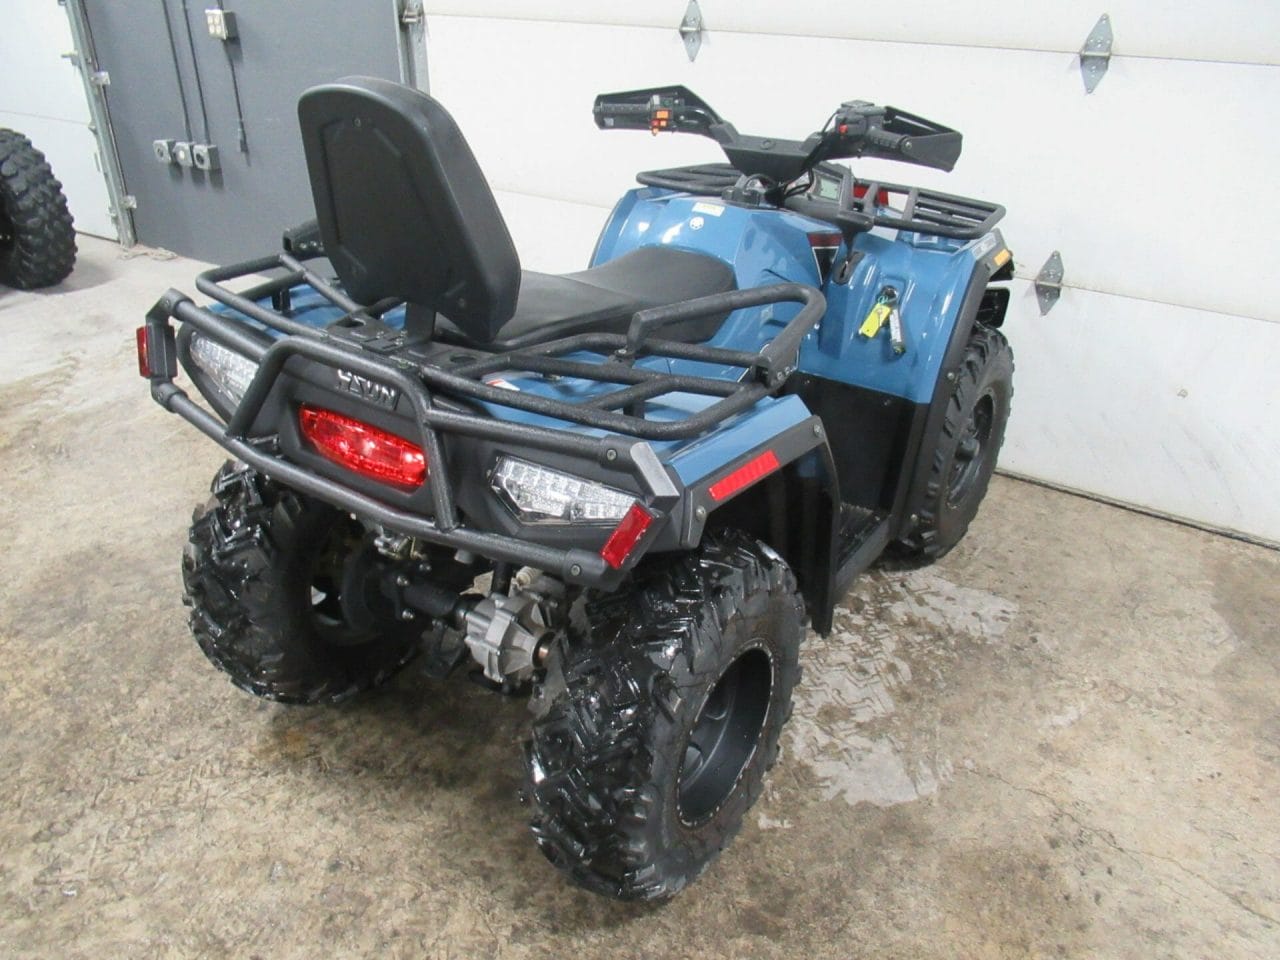 2022 Hisun Tactic 400 2-up 4×4 * New * Come with 2 Year Warranty’s *